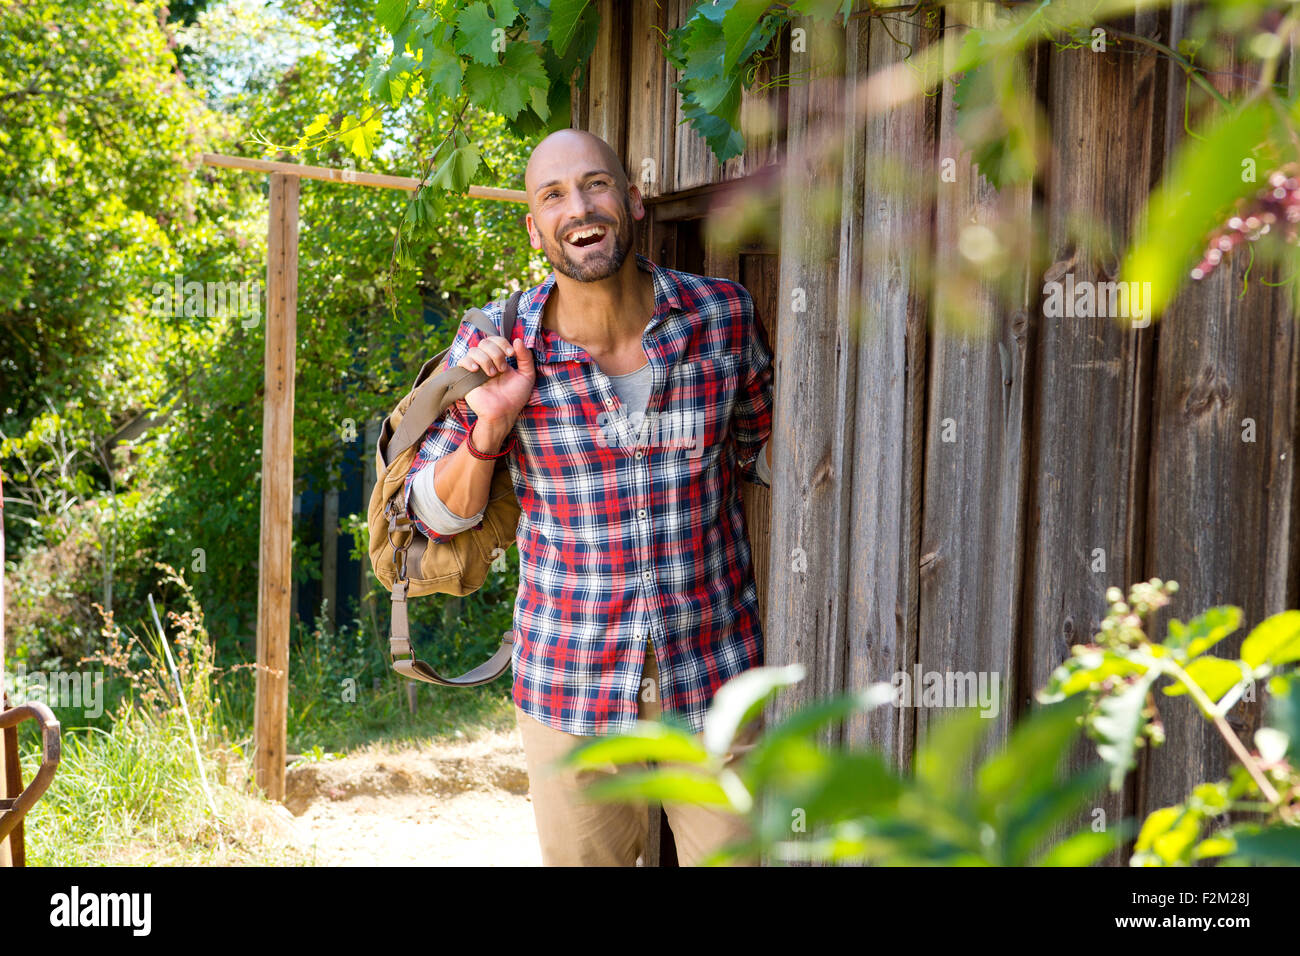 Smiling man standing at entrance door of wooden hut Stock Photo